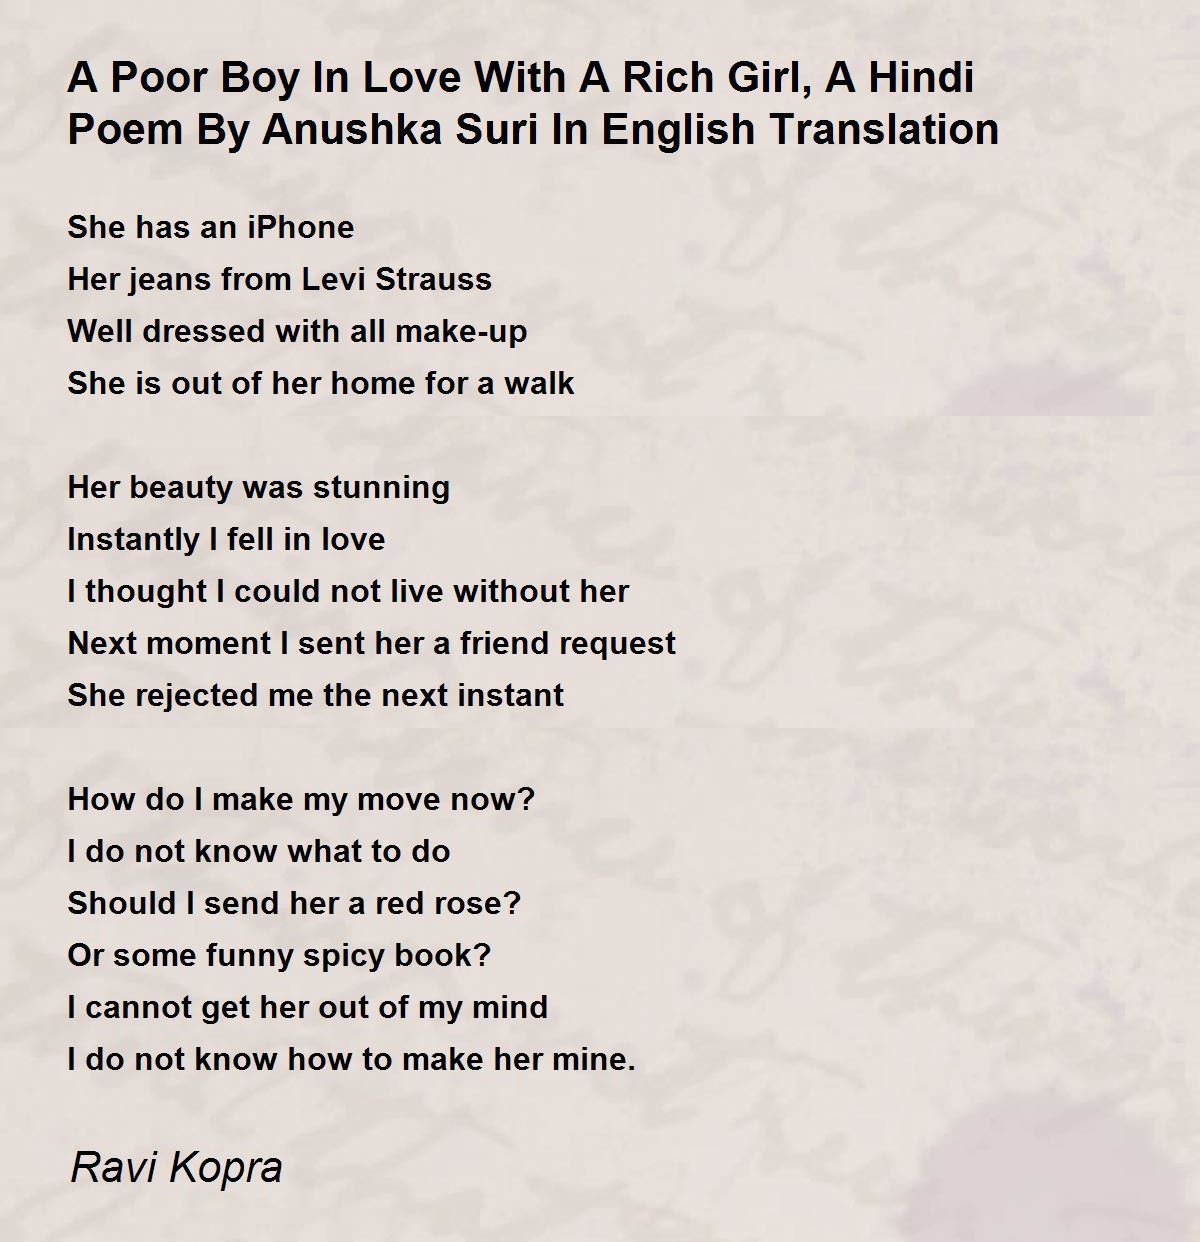 A Poor Boy In Love With A Rich Girl, A Hindi Poem By Anushka Suri In  English Translation - A Poor Boy In Love With A Rich Girl, A Hindi Poem By